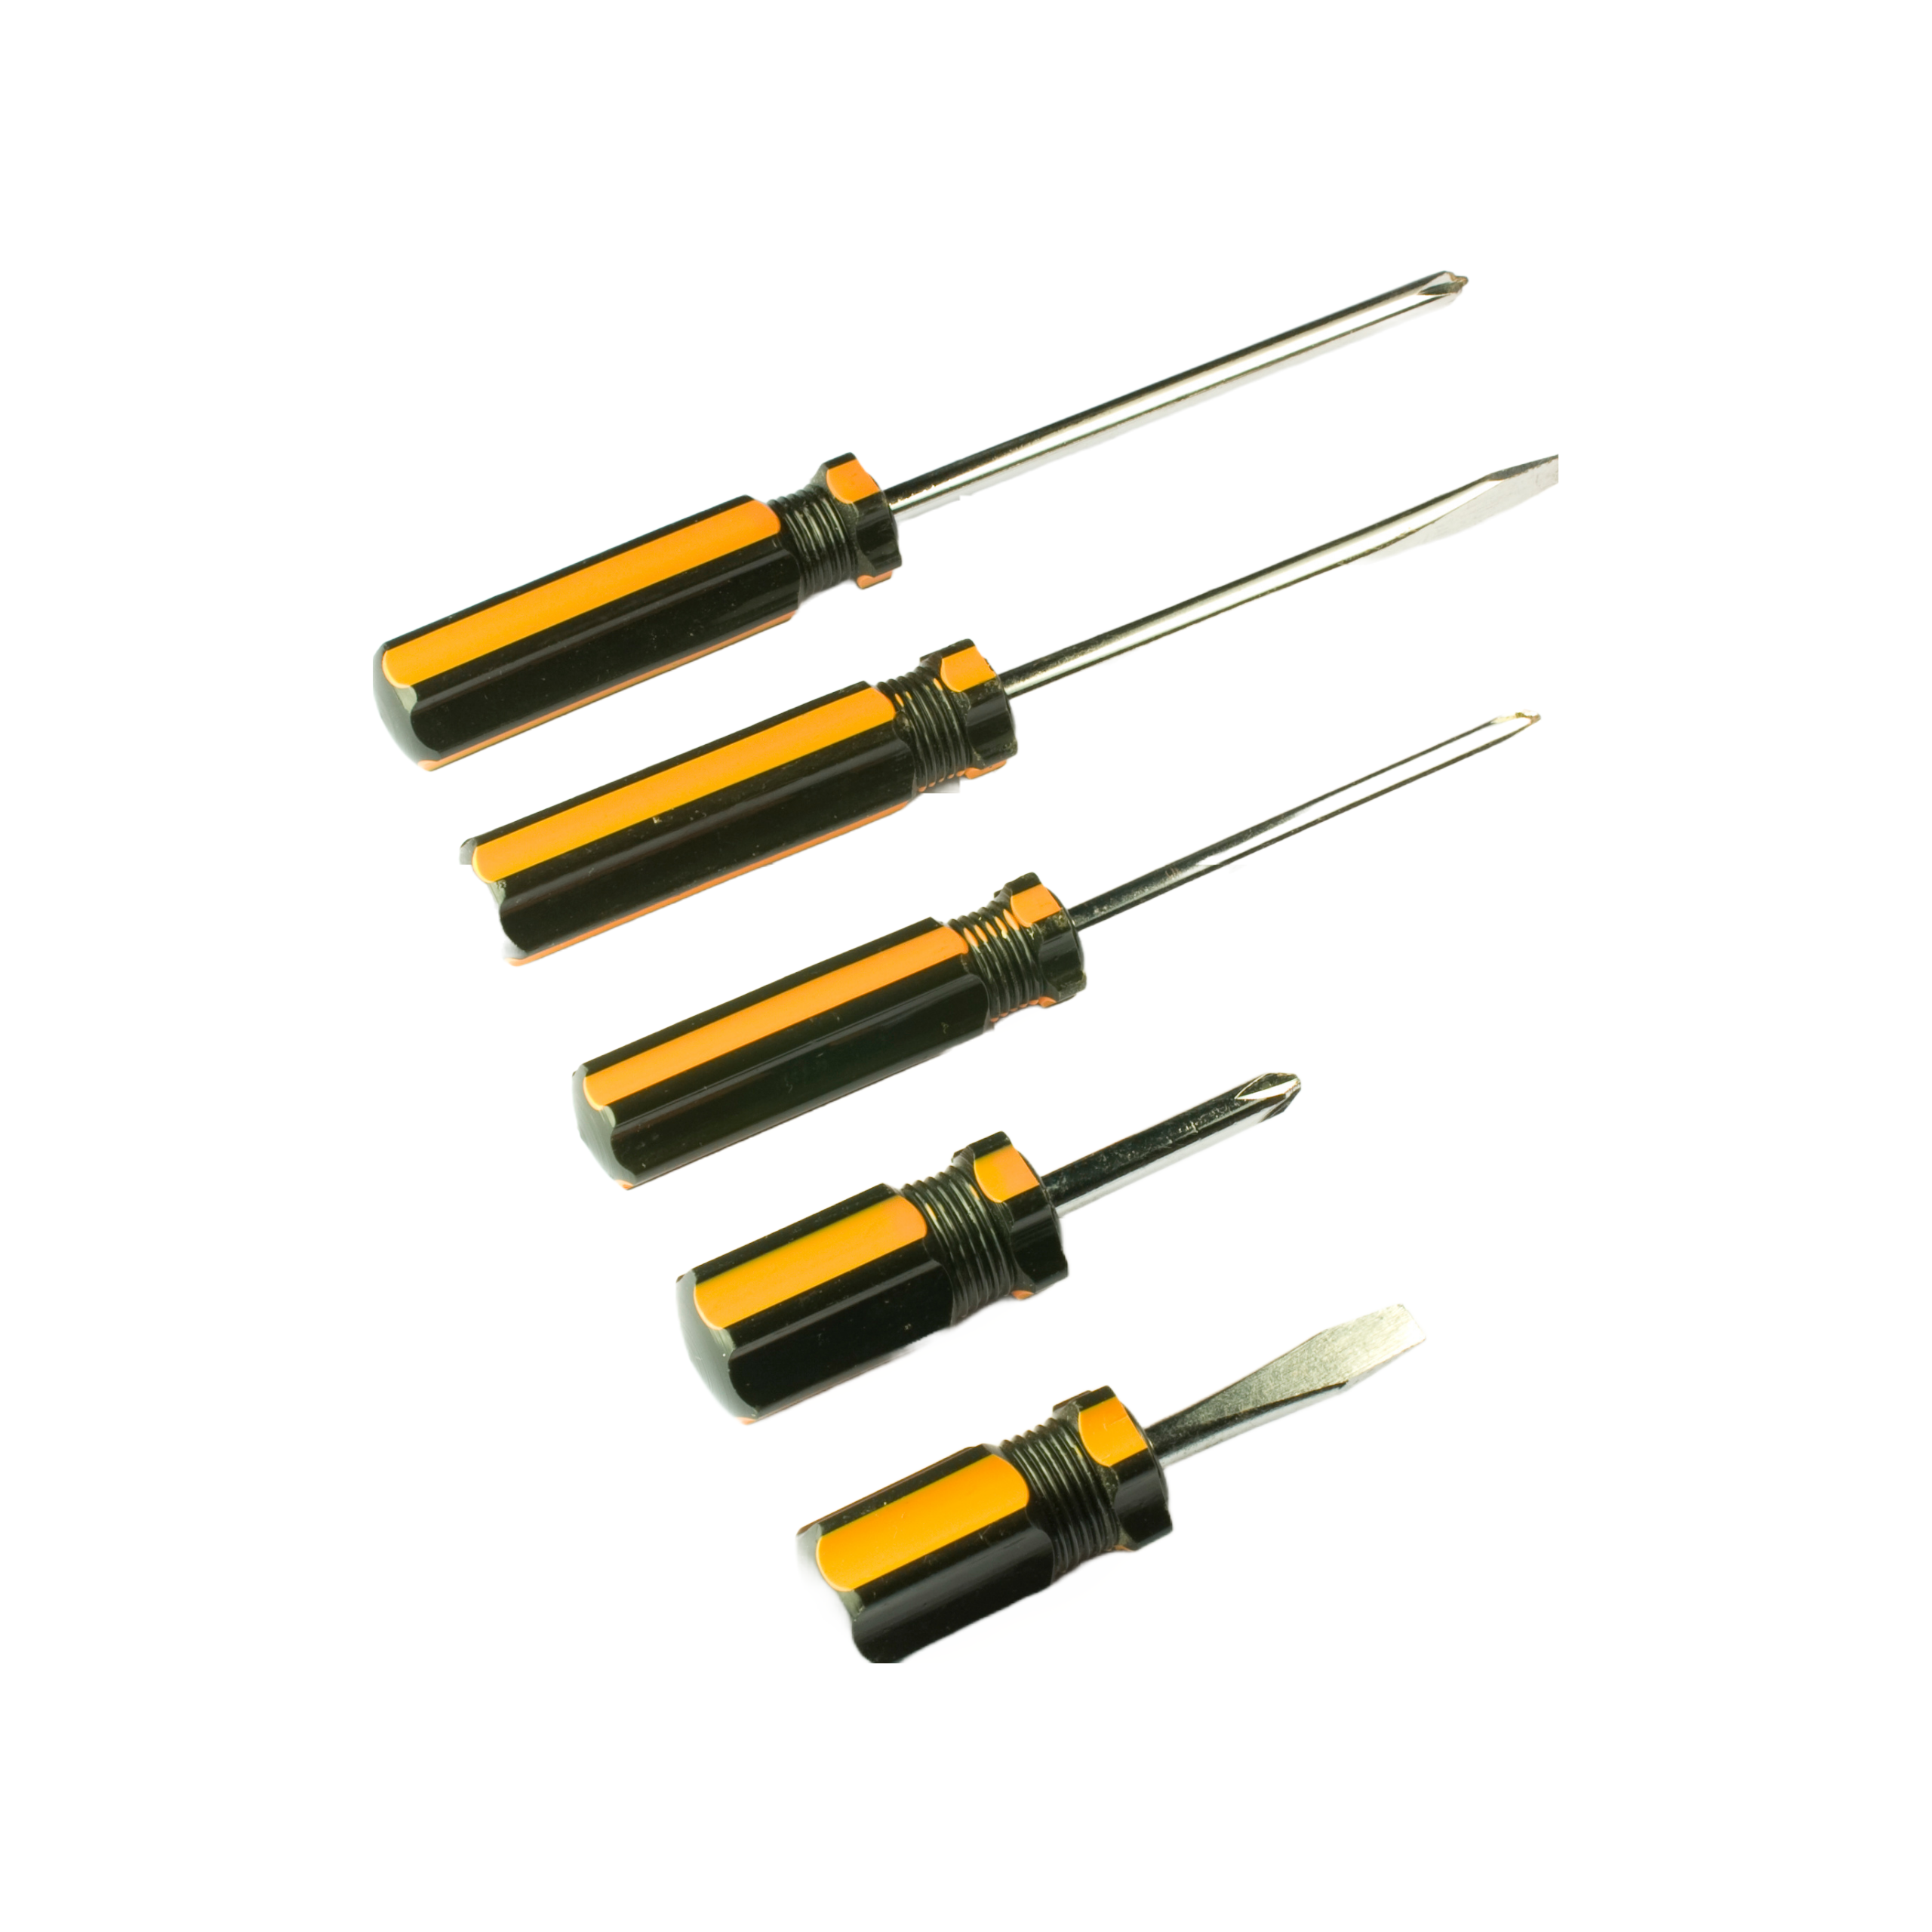 SS-SET crimp pin extractor set (5pc) - plunger style